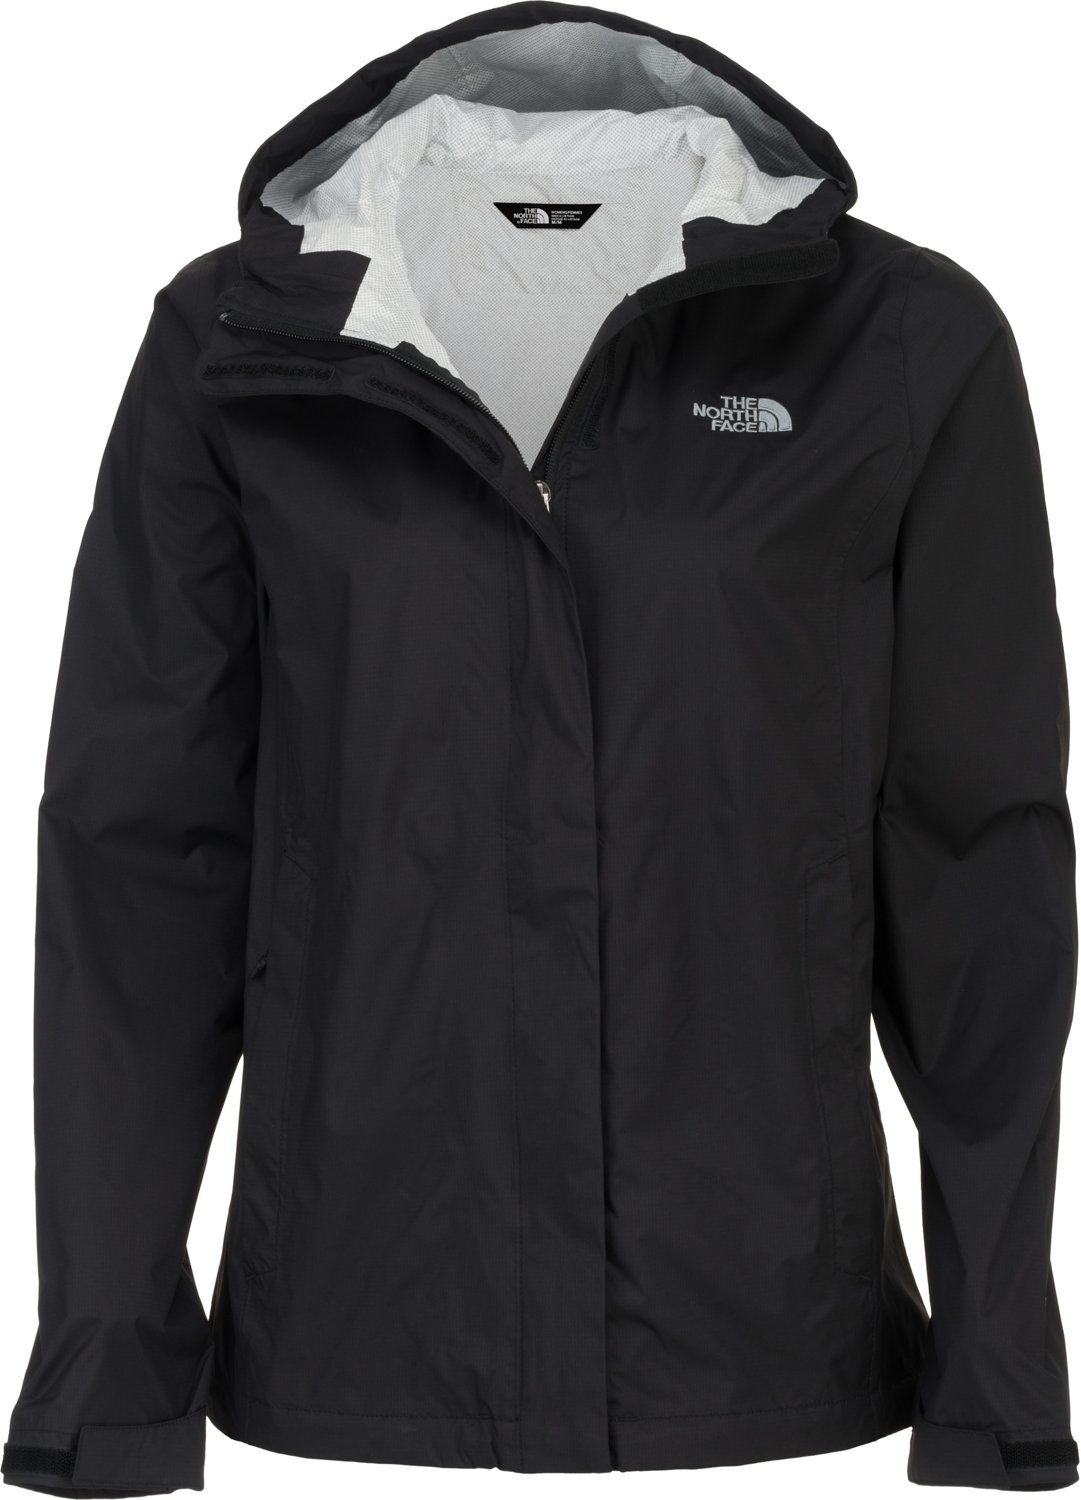 north face women's jacket on sale